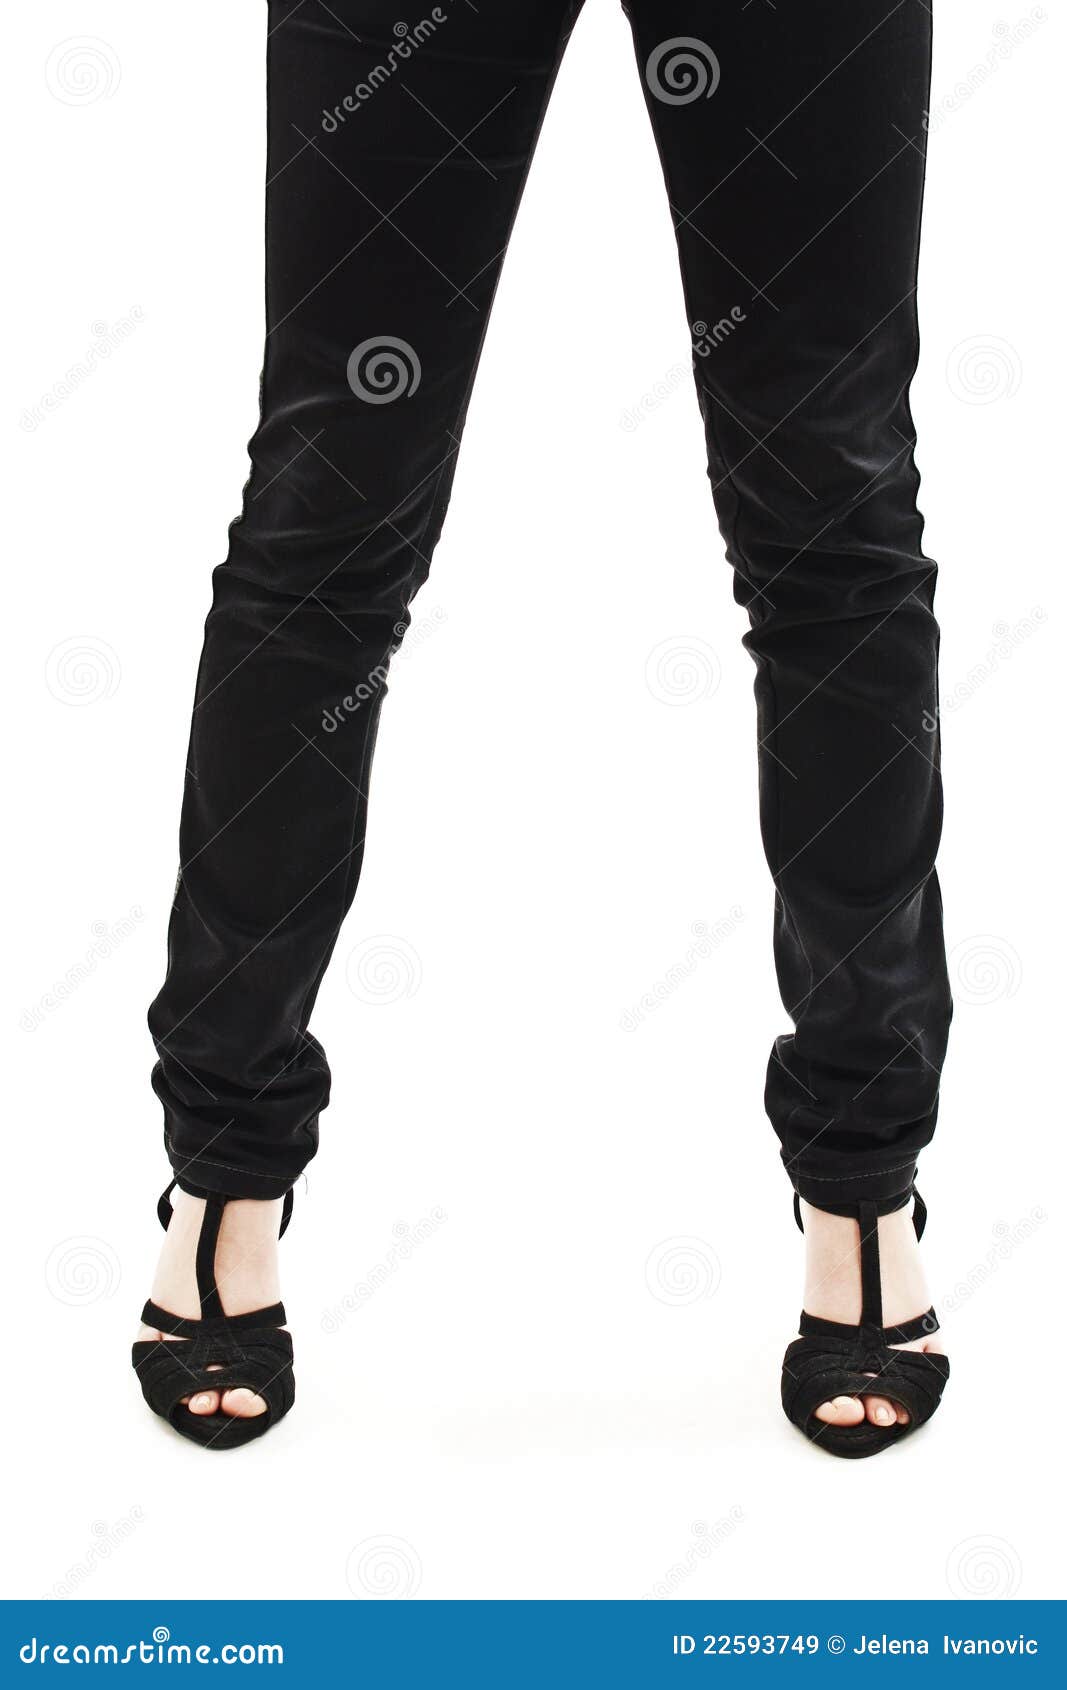 Woman in Black Jeans with Feet in Sandals Stock Image - Image of ...